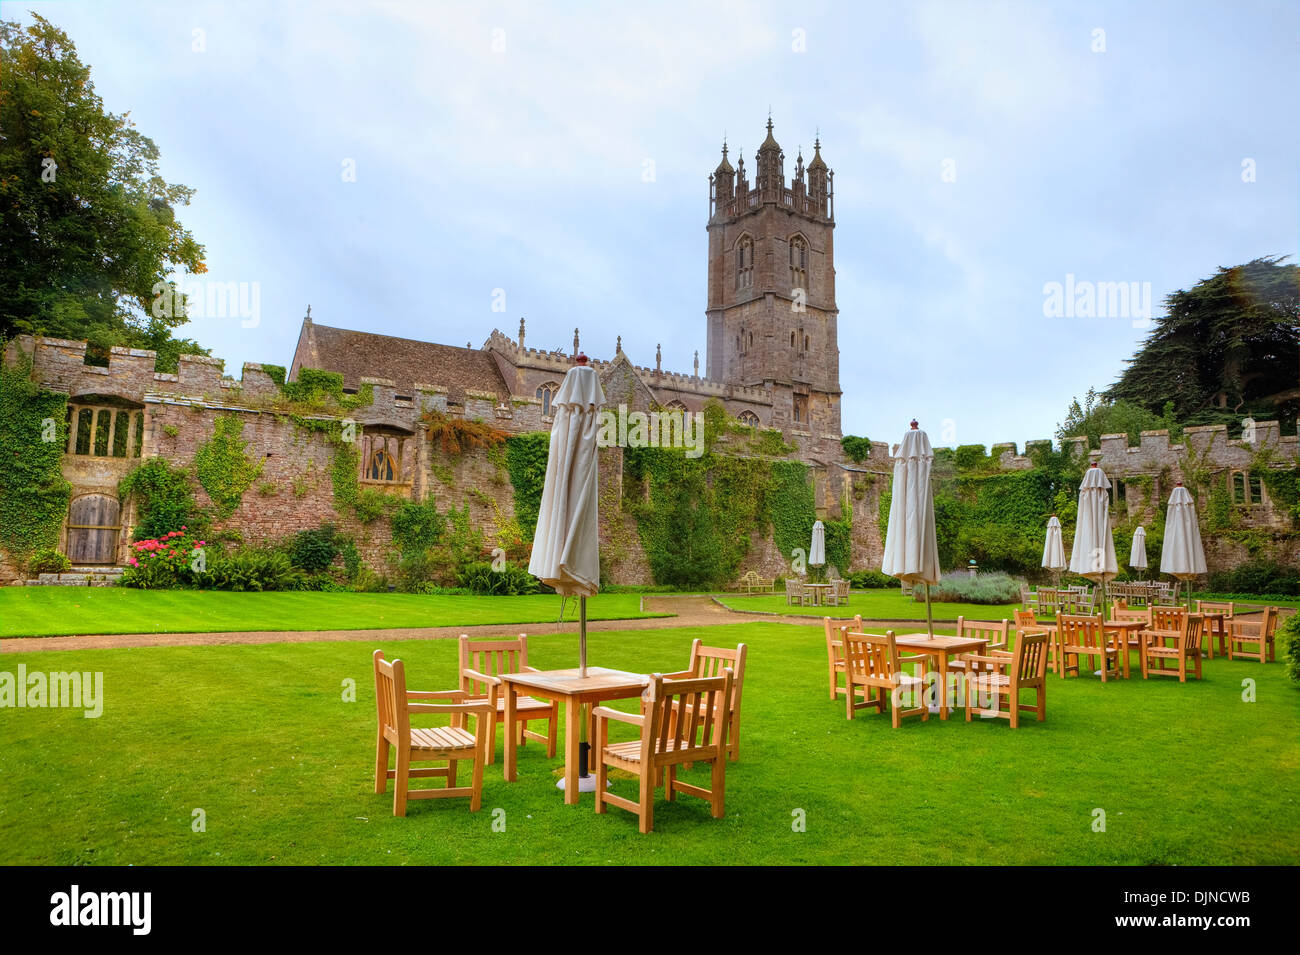 Thornbury, St Mary's Church, Gloucestershire, Angleterre, Royaume-Uni Banque D'Images